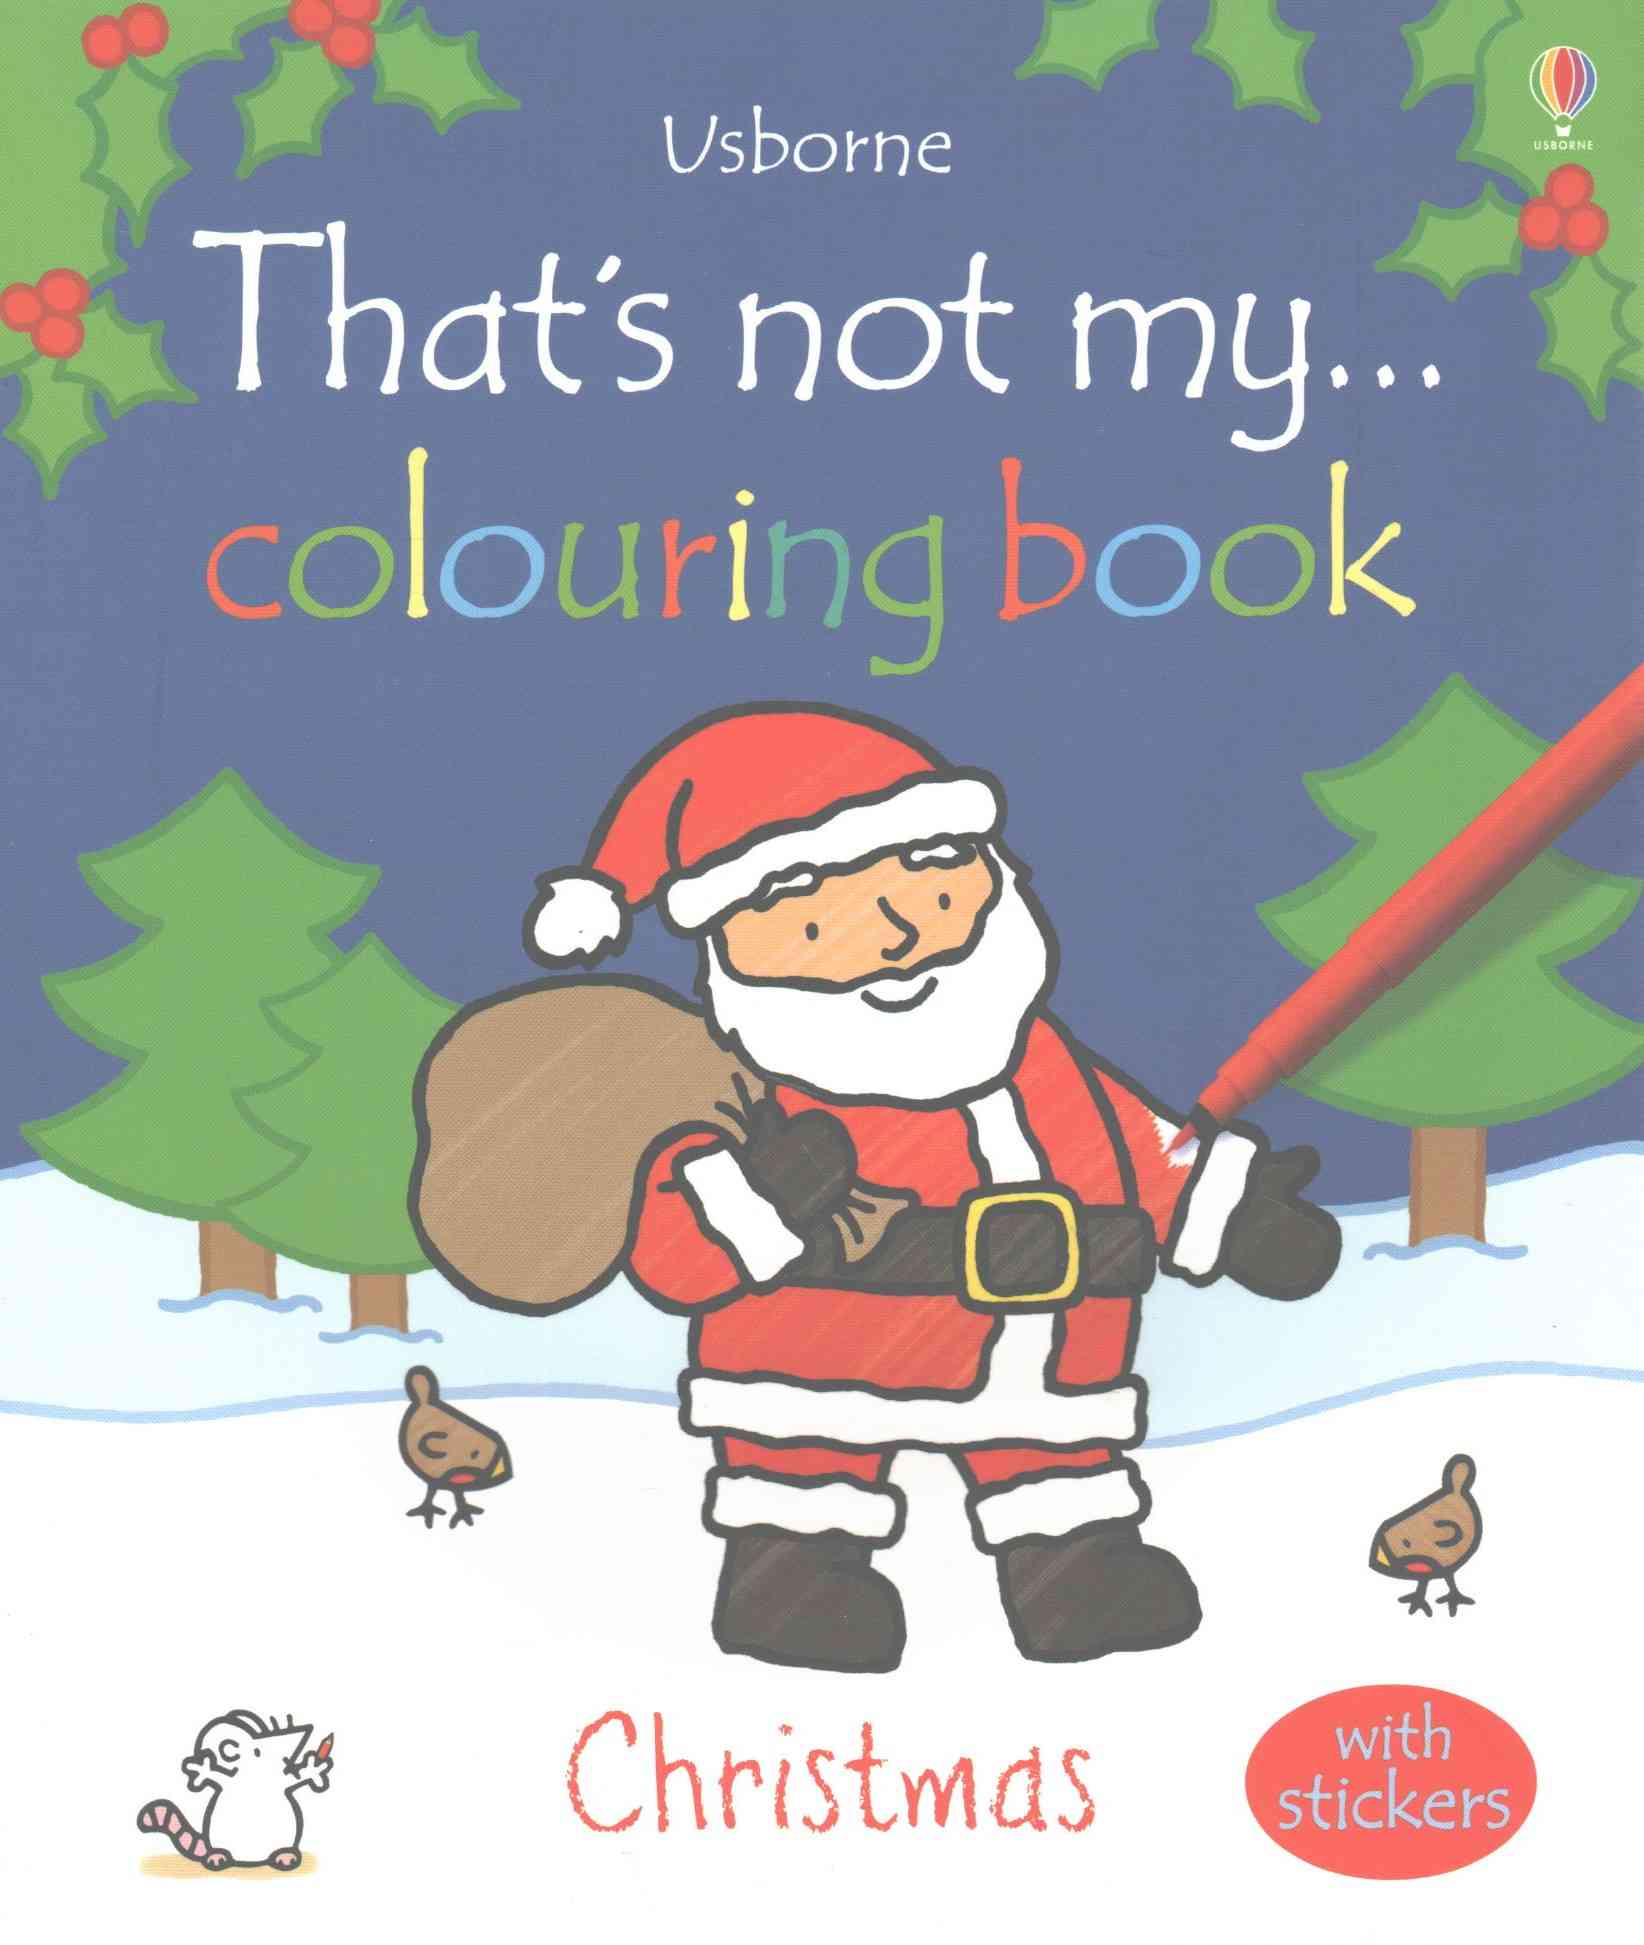 AB Christmas That's not my Christmas colour +Sticker bk